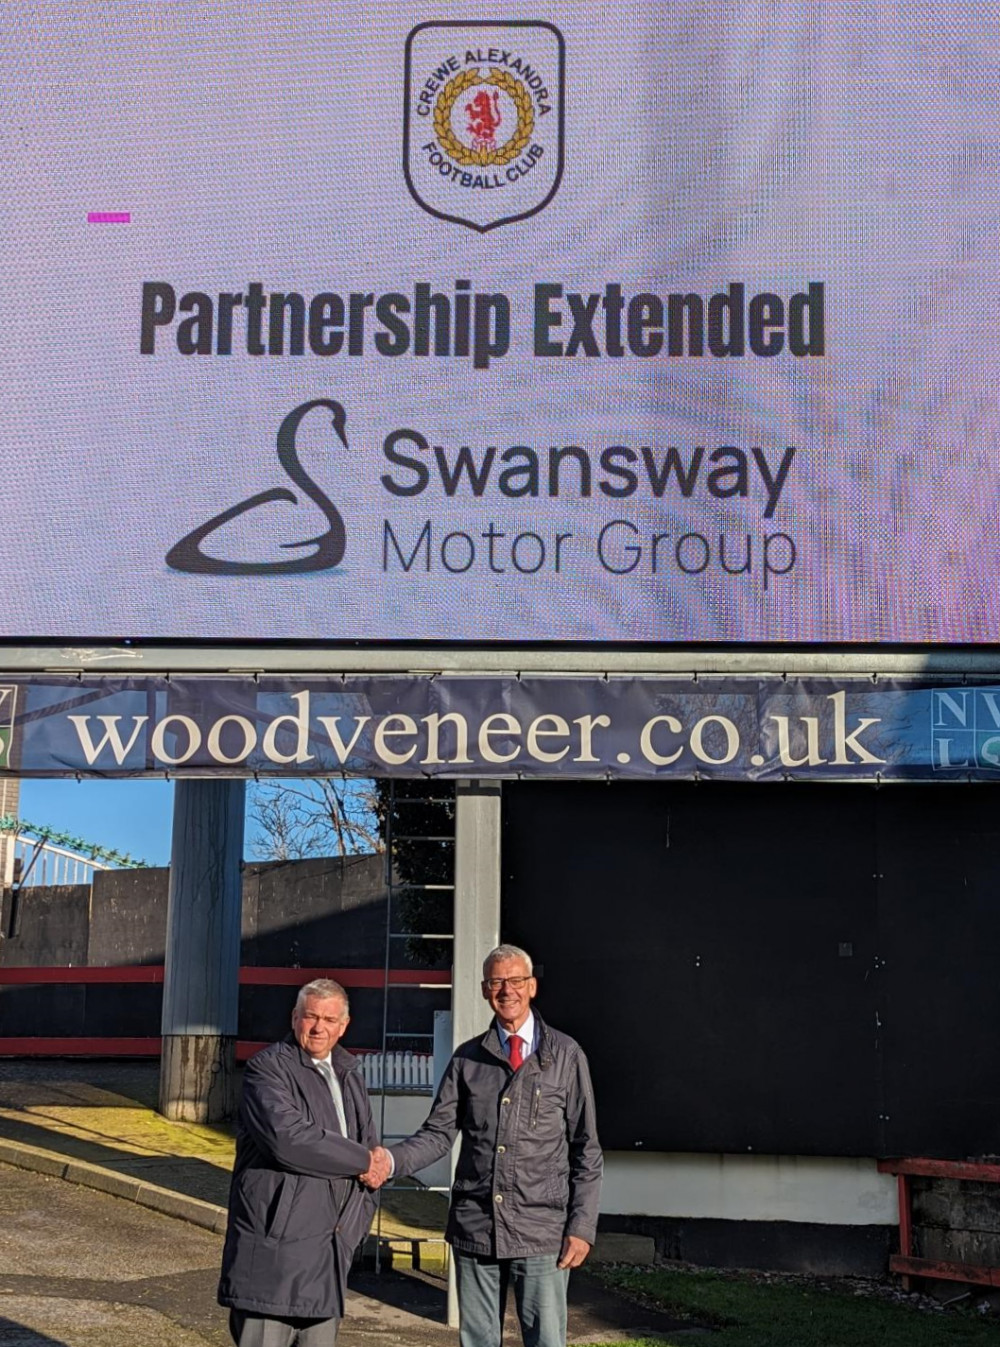 After a successful first season together, Swansway Motor Group re-signed with Crewe Alex for the 2023/24 season (Nub News).